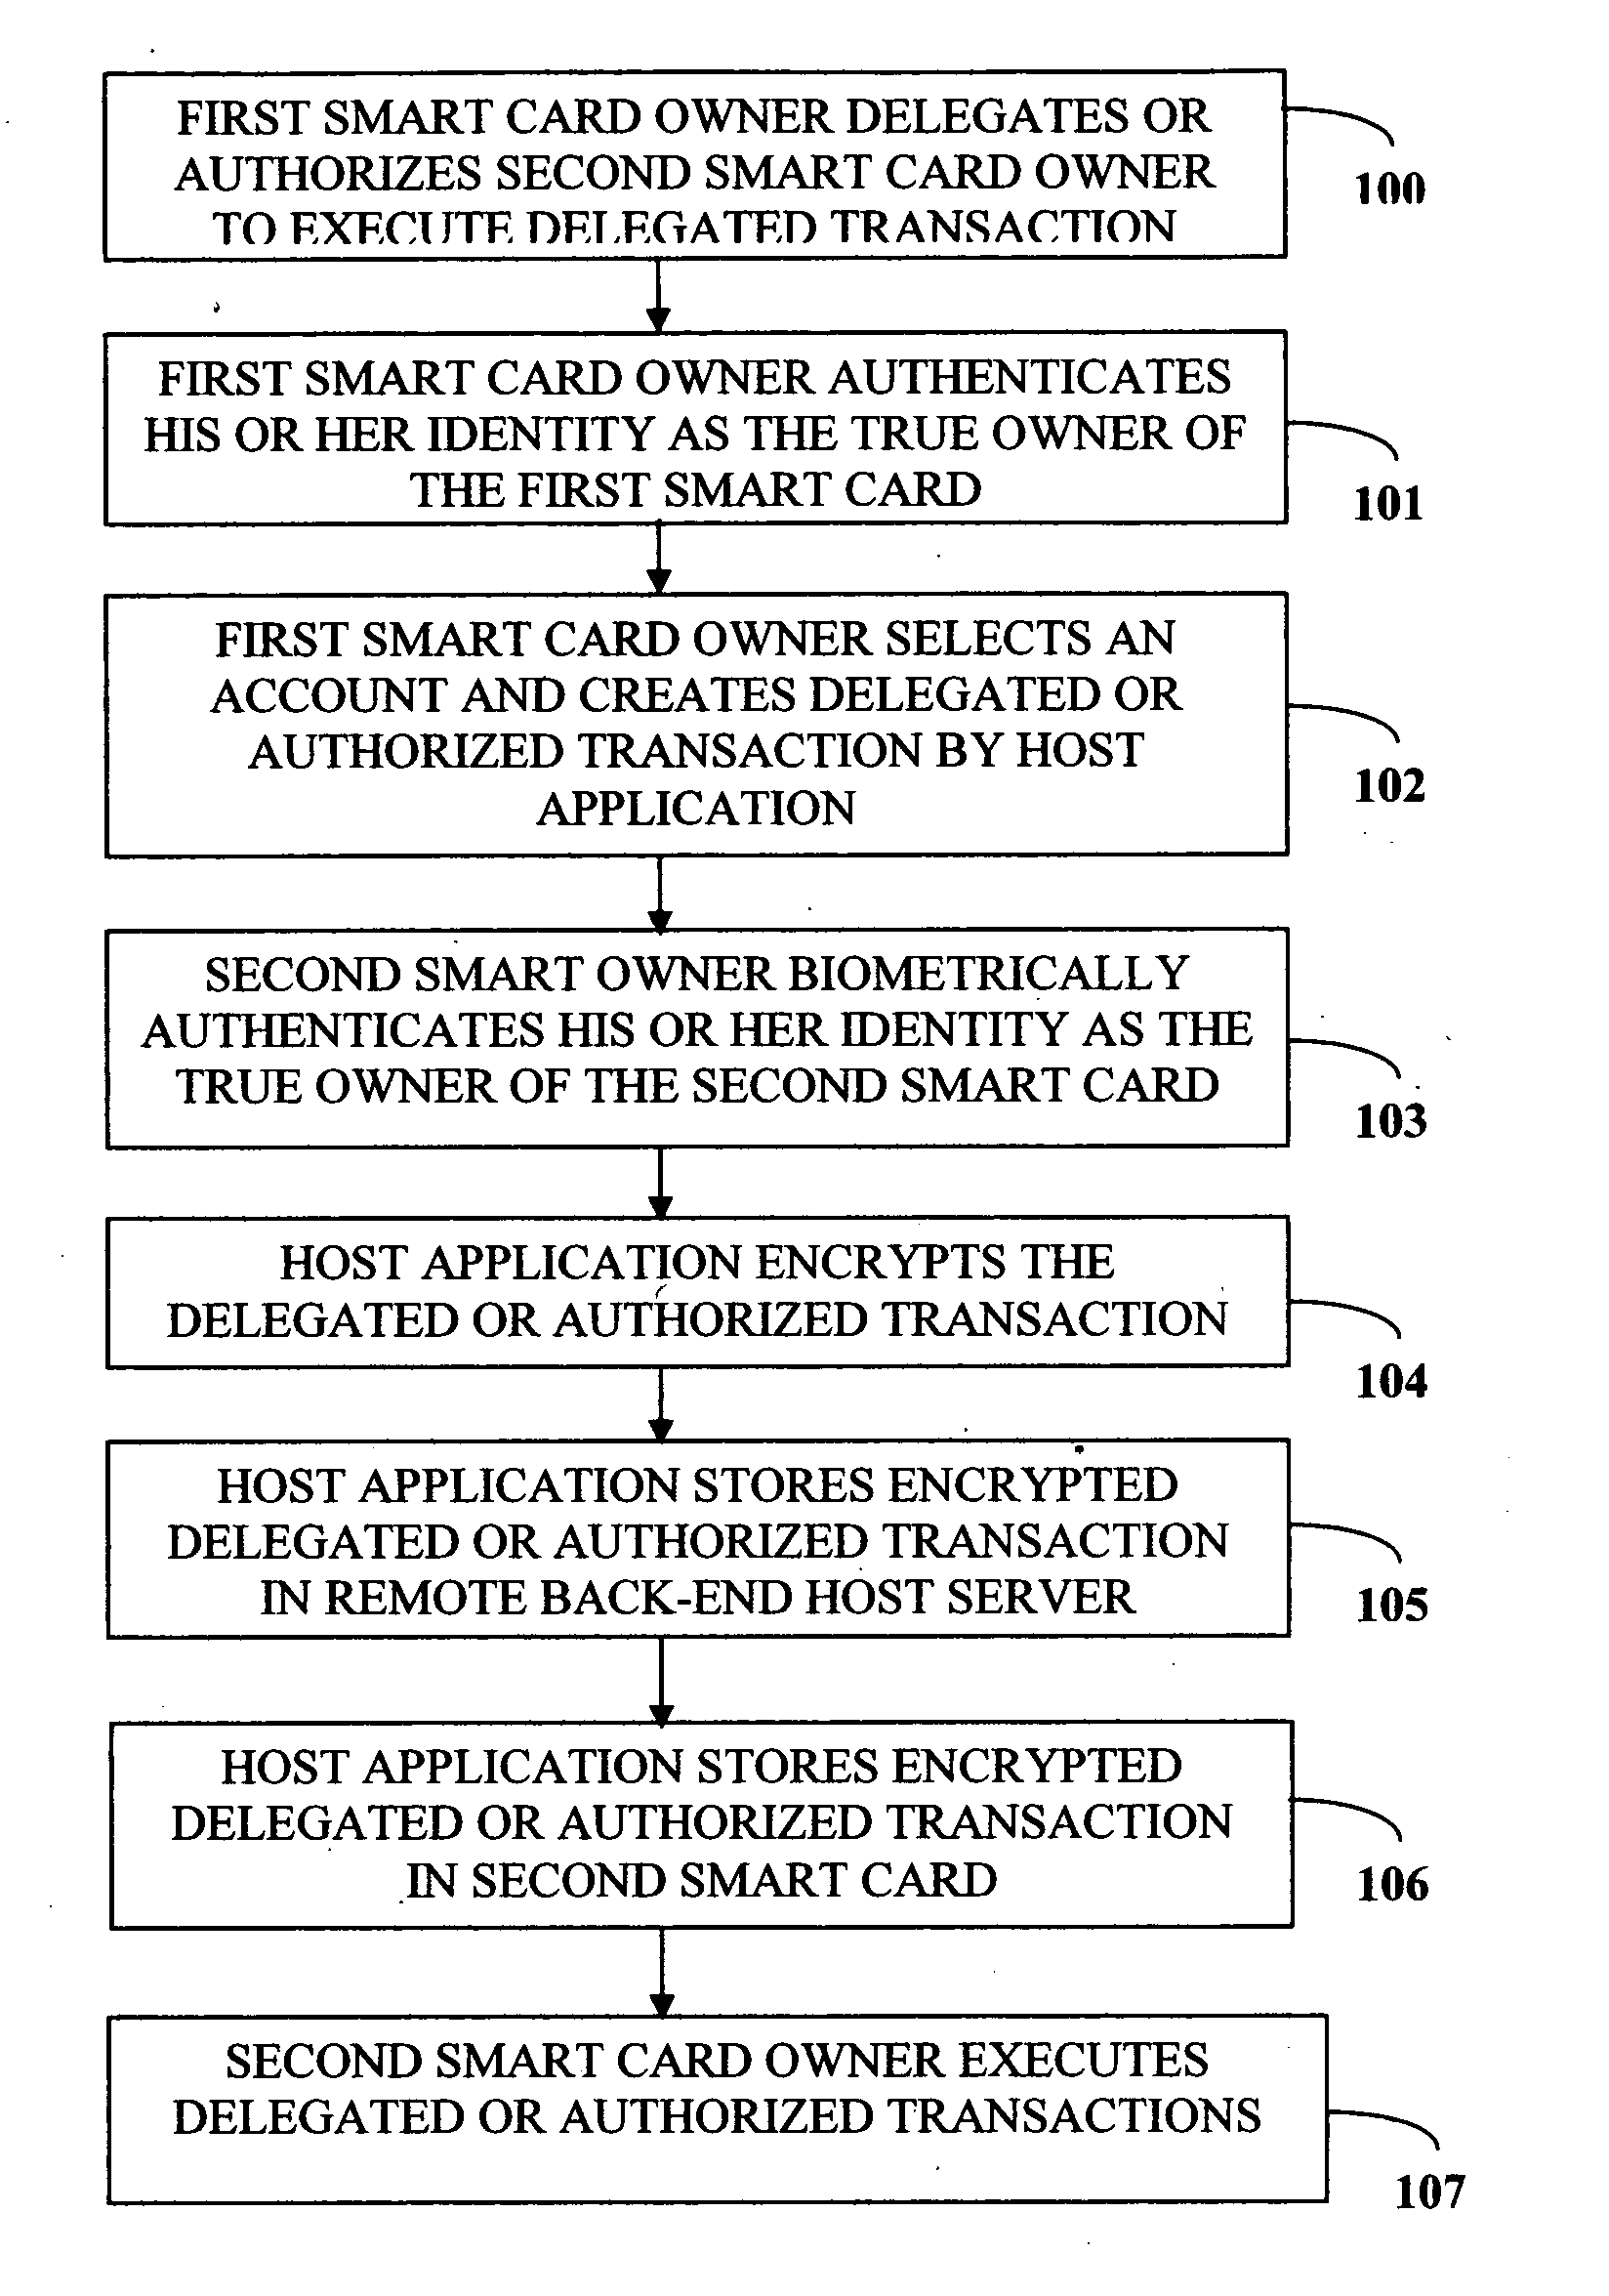 Biometric delegation and authentication of financial transactions